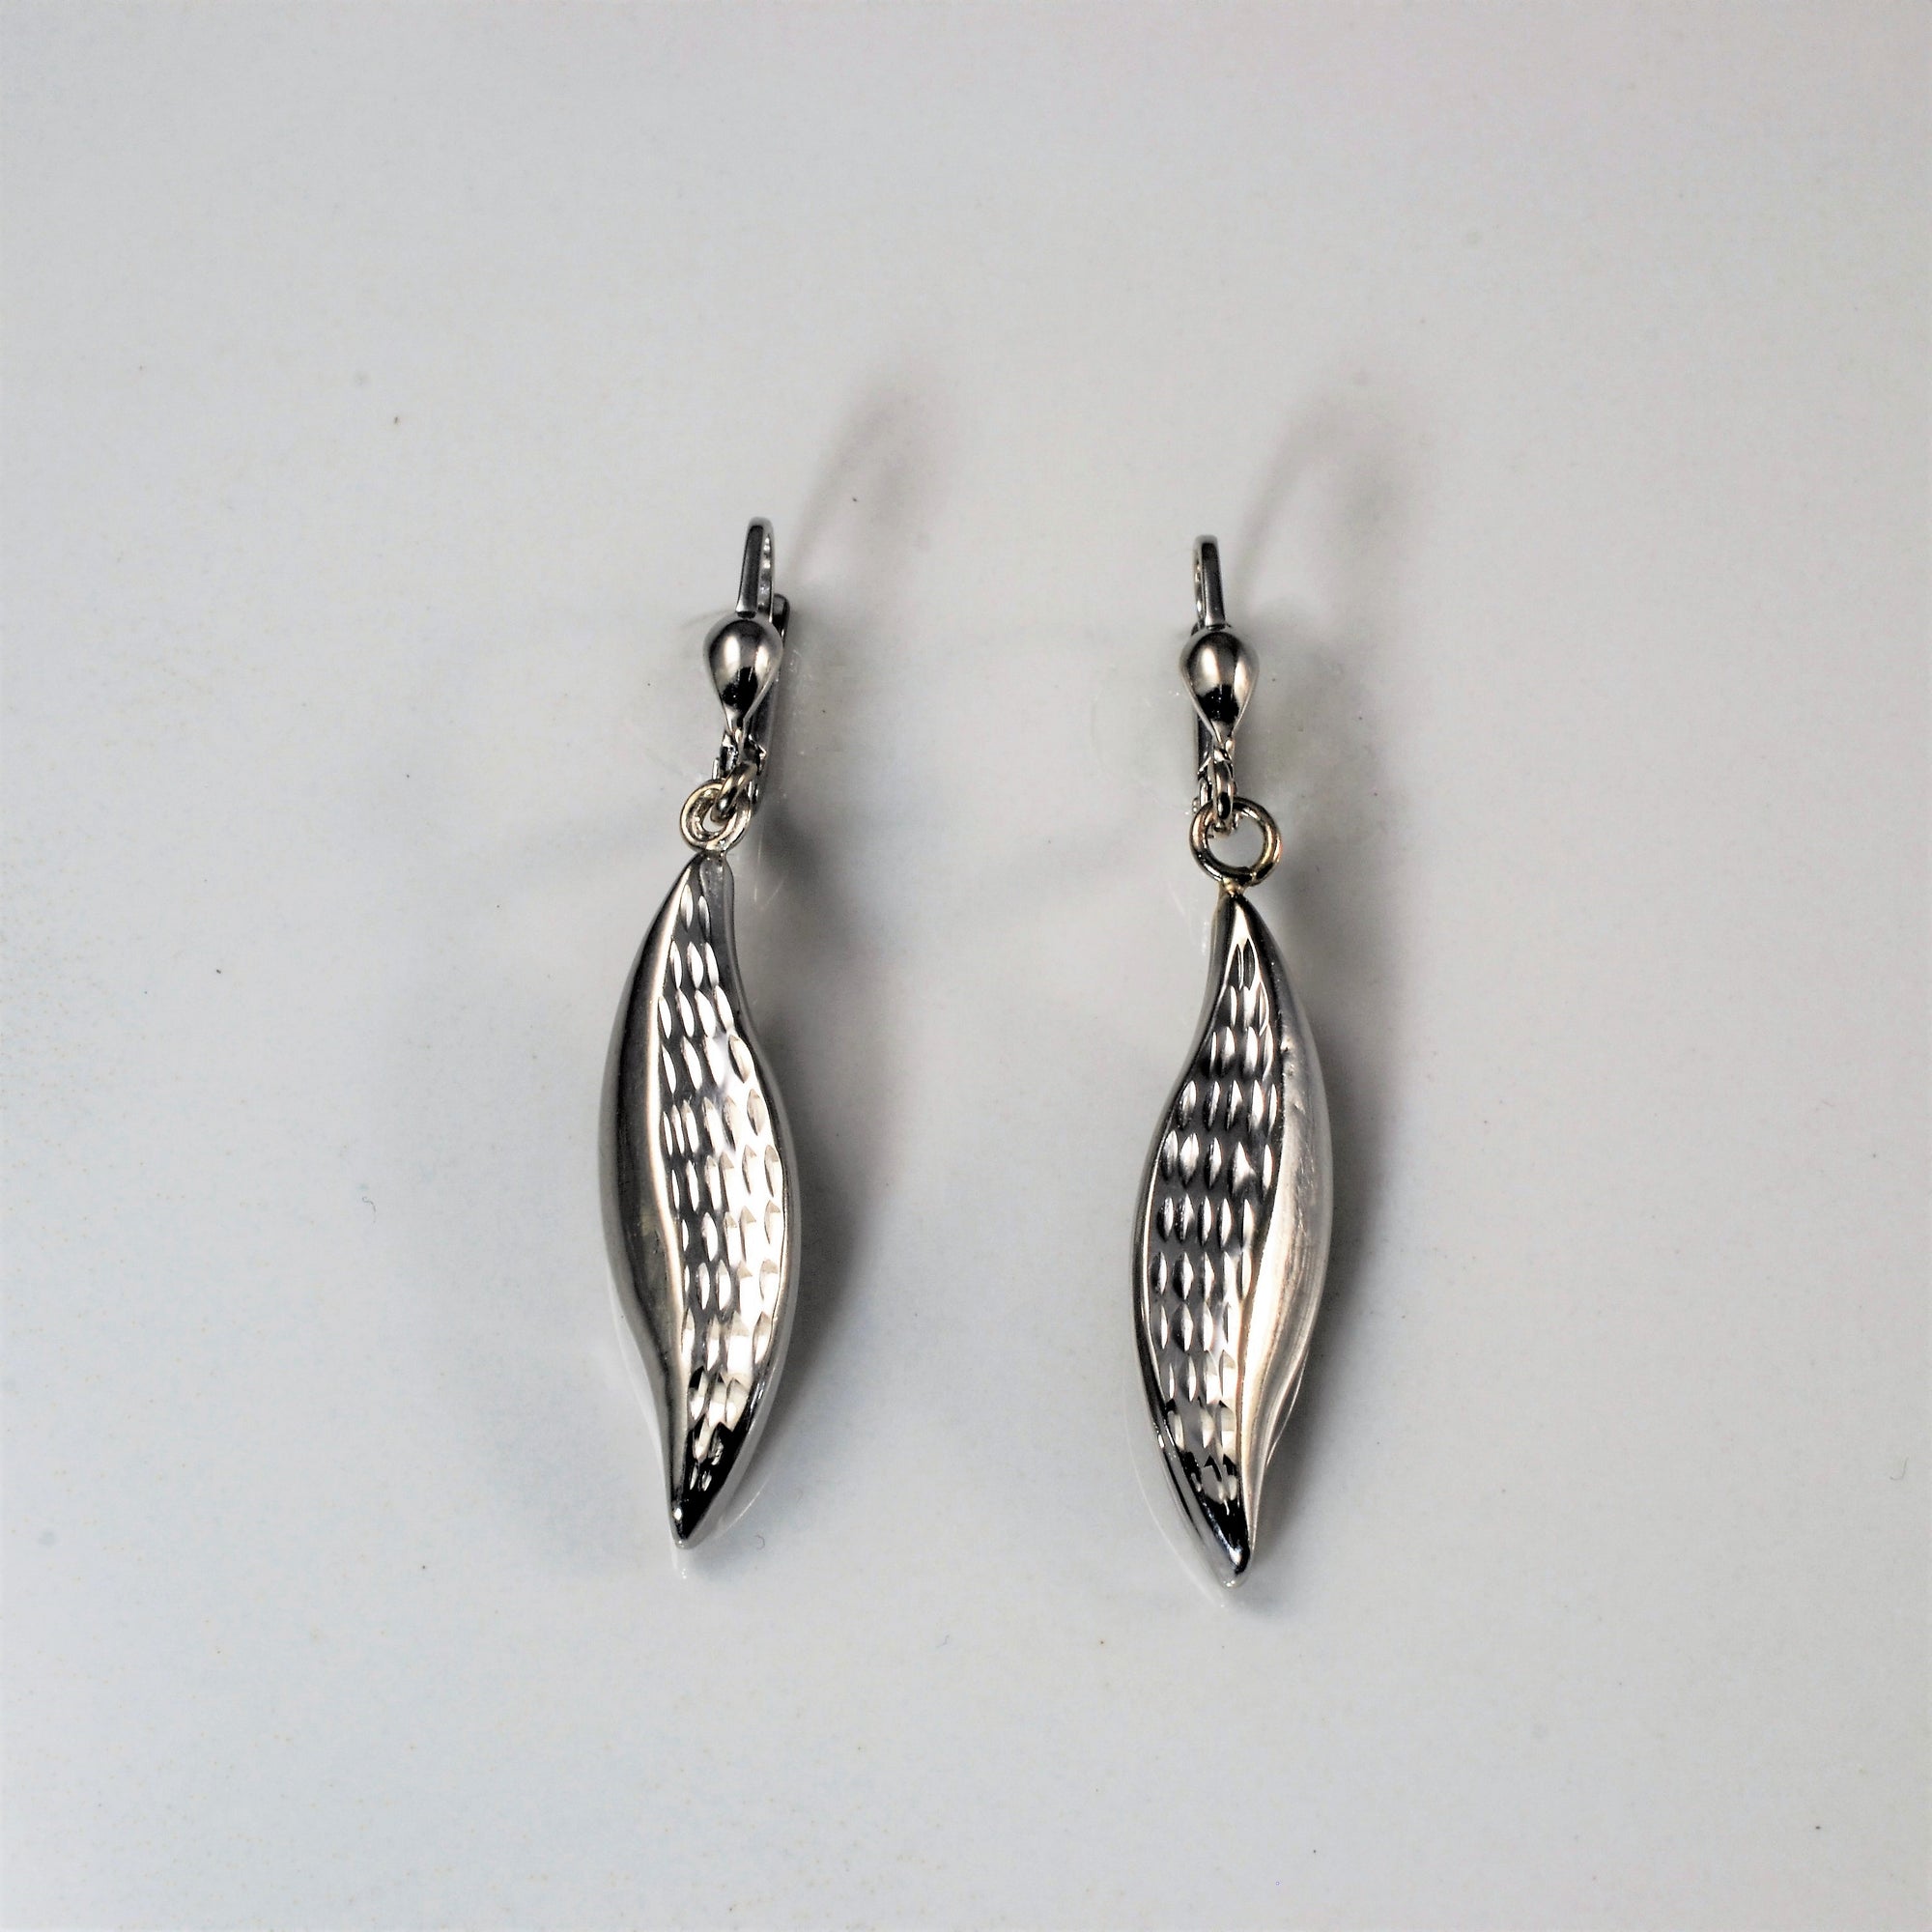 Textured White Gold Drop Earrings |